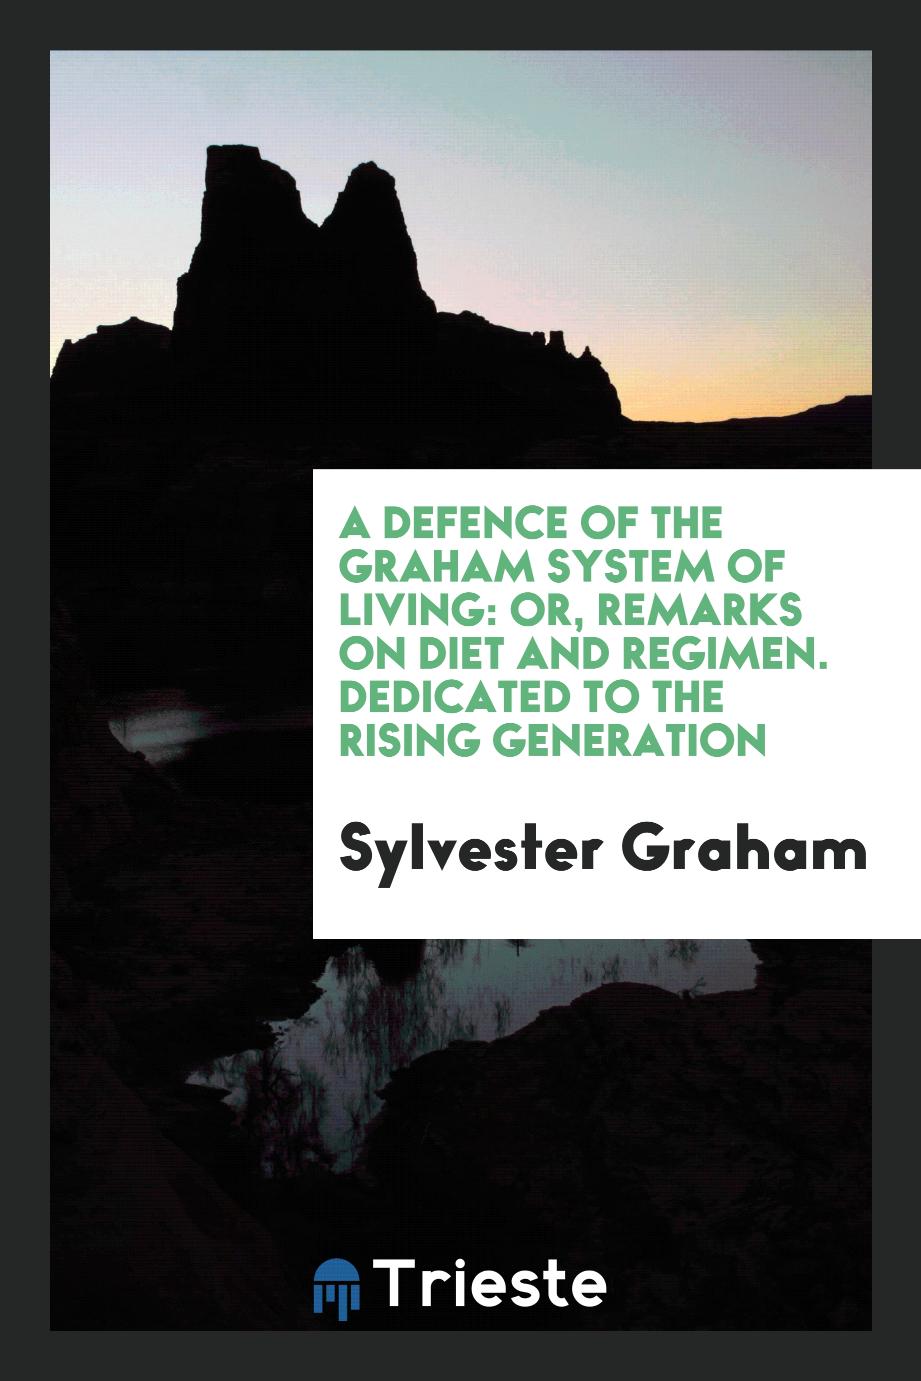 A Defence of the Graham System of Living: Or, Remarks on Diet and Regimen. Dedicated to the Rising Generation